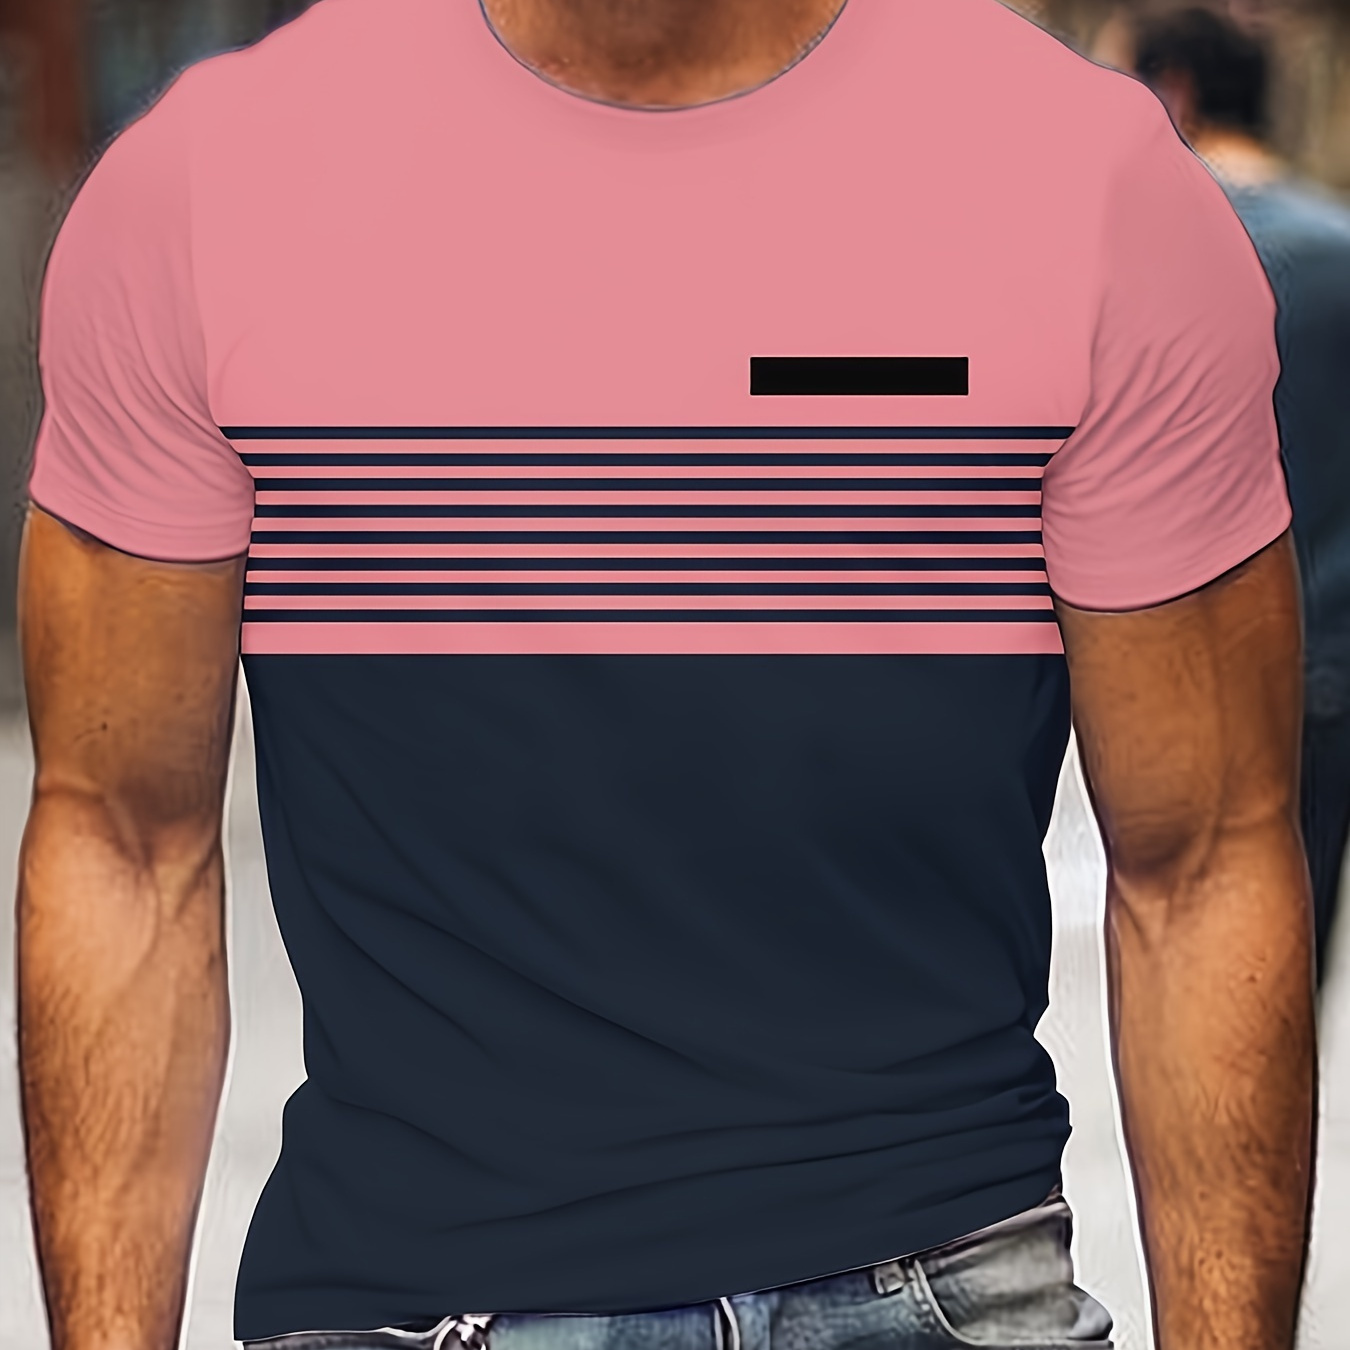 

Men's Summer Casual T-shirt, Digital Print Striped, Short Sleeve Outdoor Sports Tee, Round Neck, Slim Fit And Breathable